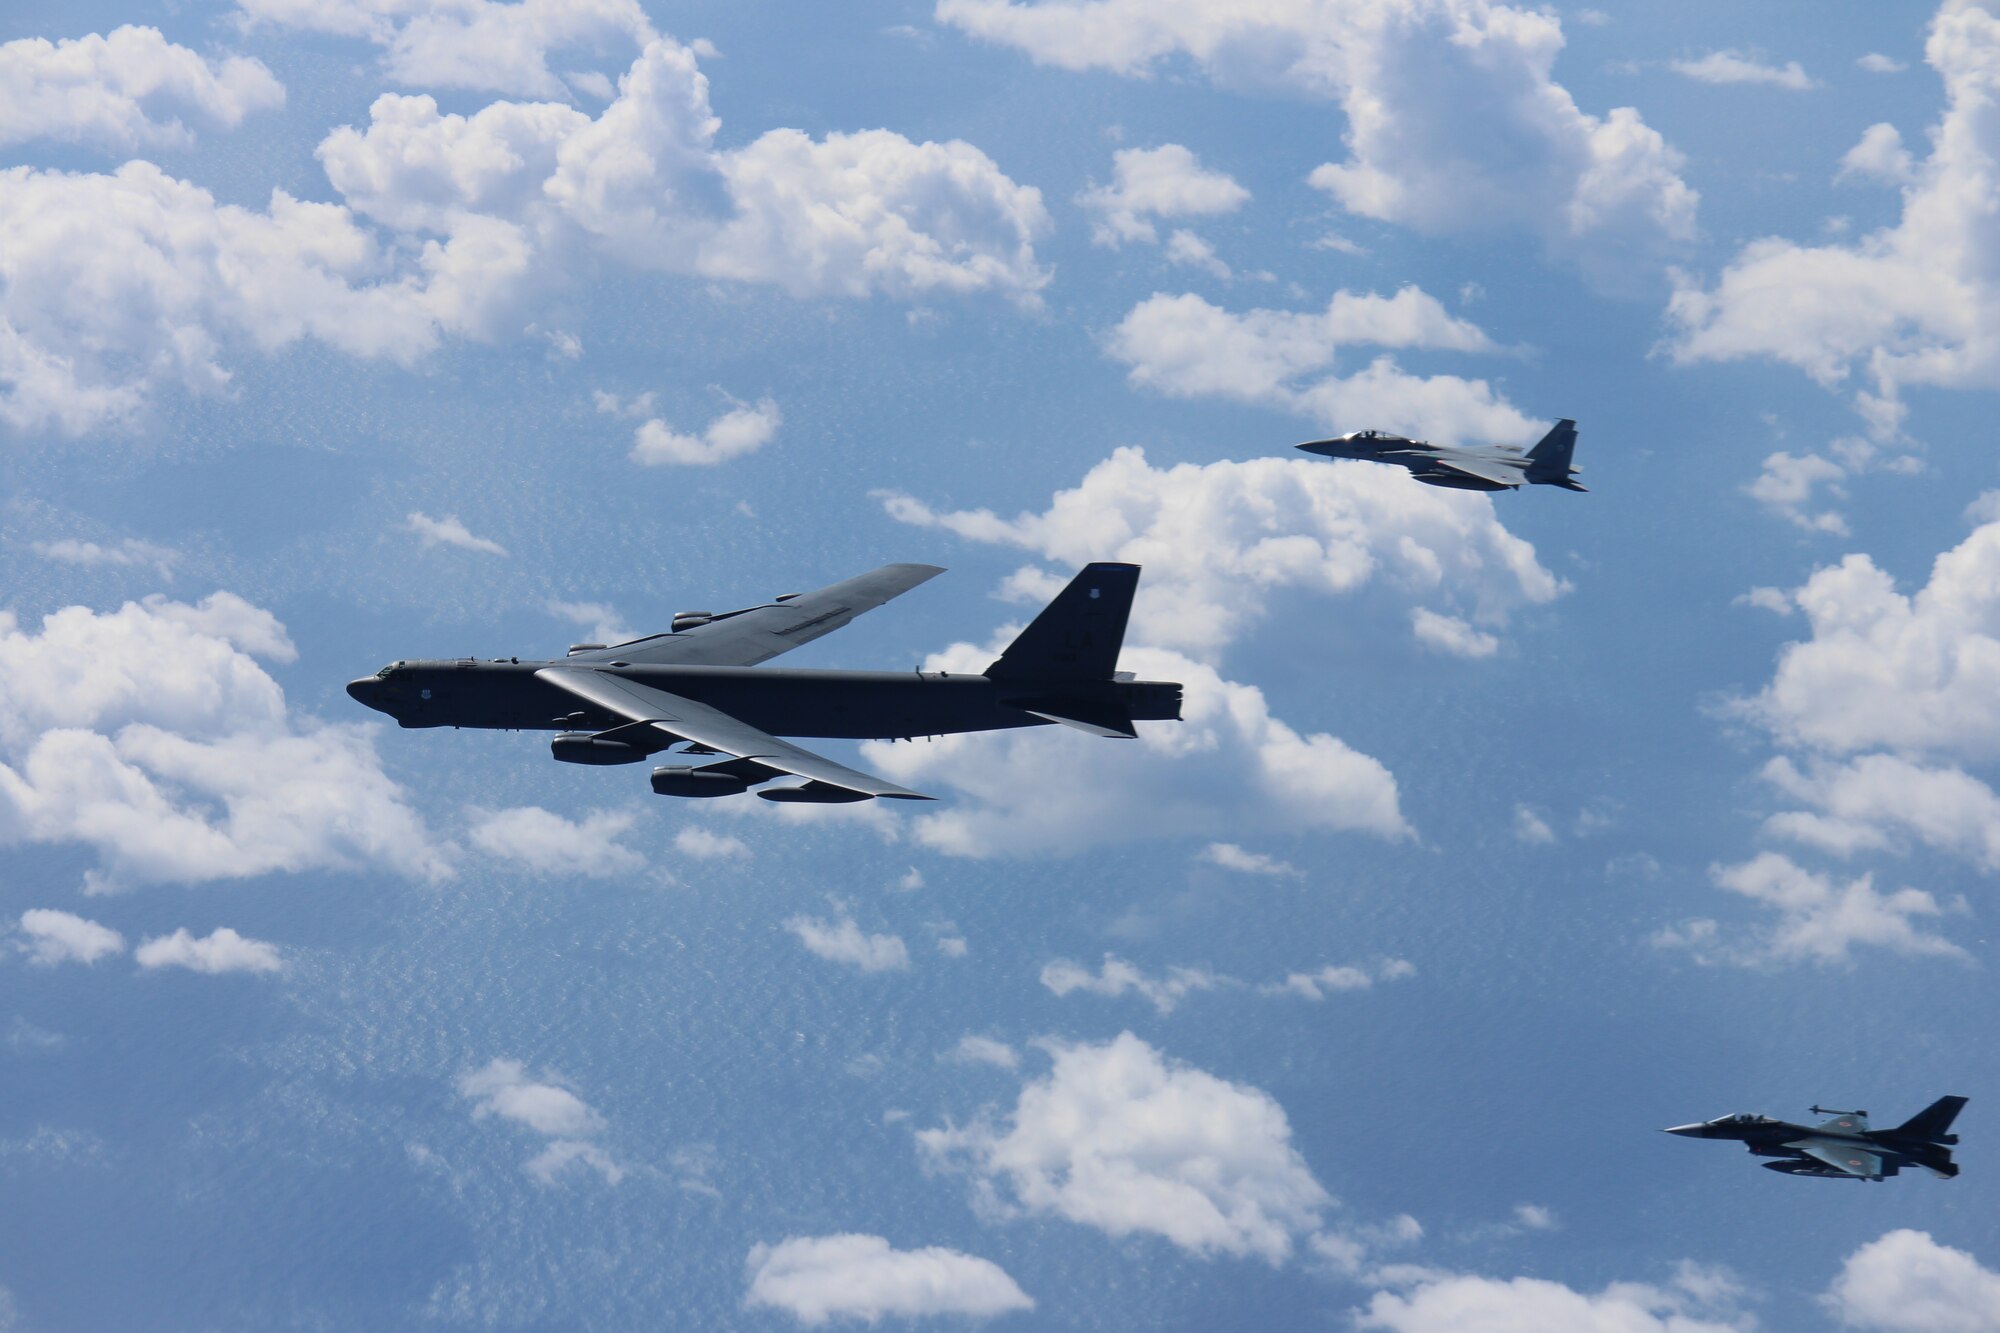 An Air Force B-52H Stratofortress bomber and a Japan Air Self-Defense Force F-15 and F-2 fighter execute a routine bilateral training mission over the East China Sea and the Sea of Japan, Sept. 26, 2018. This mission was flown in support of U.S. Indo-Pacific Command’s Continuous Bomber Presence operations, which are key to improving combined interoperability, tactical skills and relationships. (Courtesy photo)